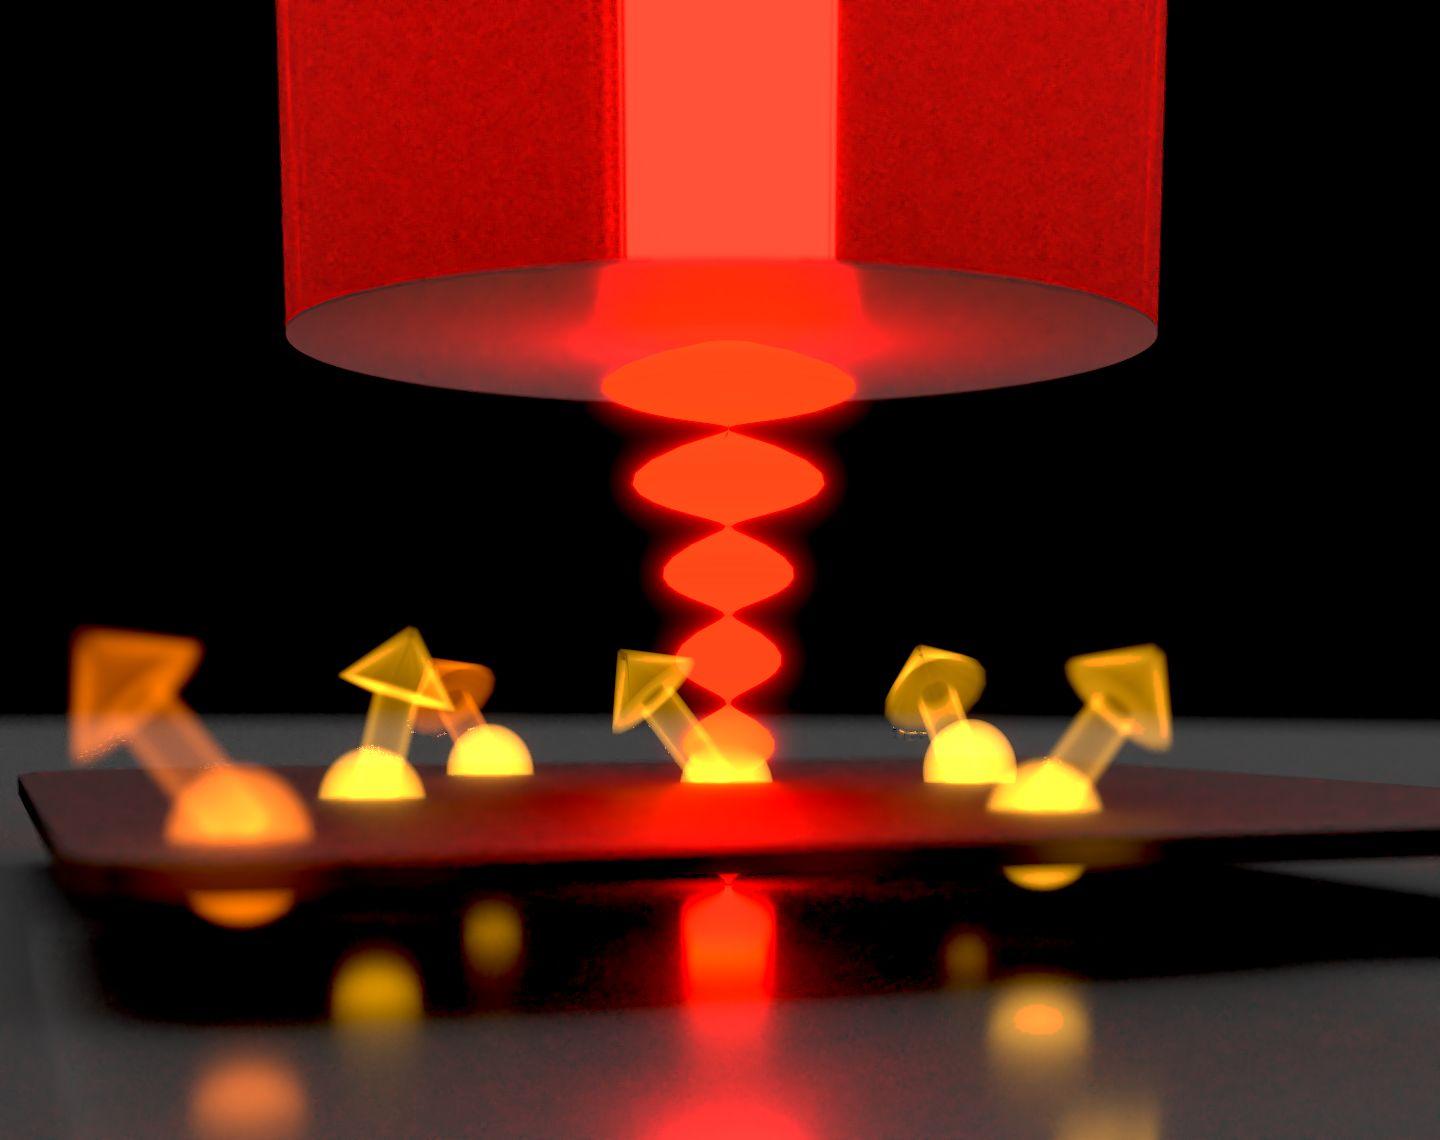 SQUARE Team Studies Light-Activated Materials for Building Multifunctional Qubits